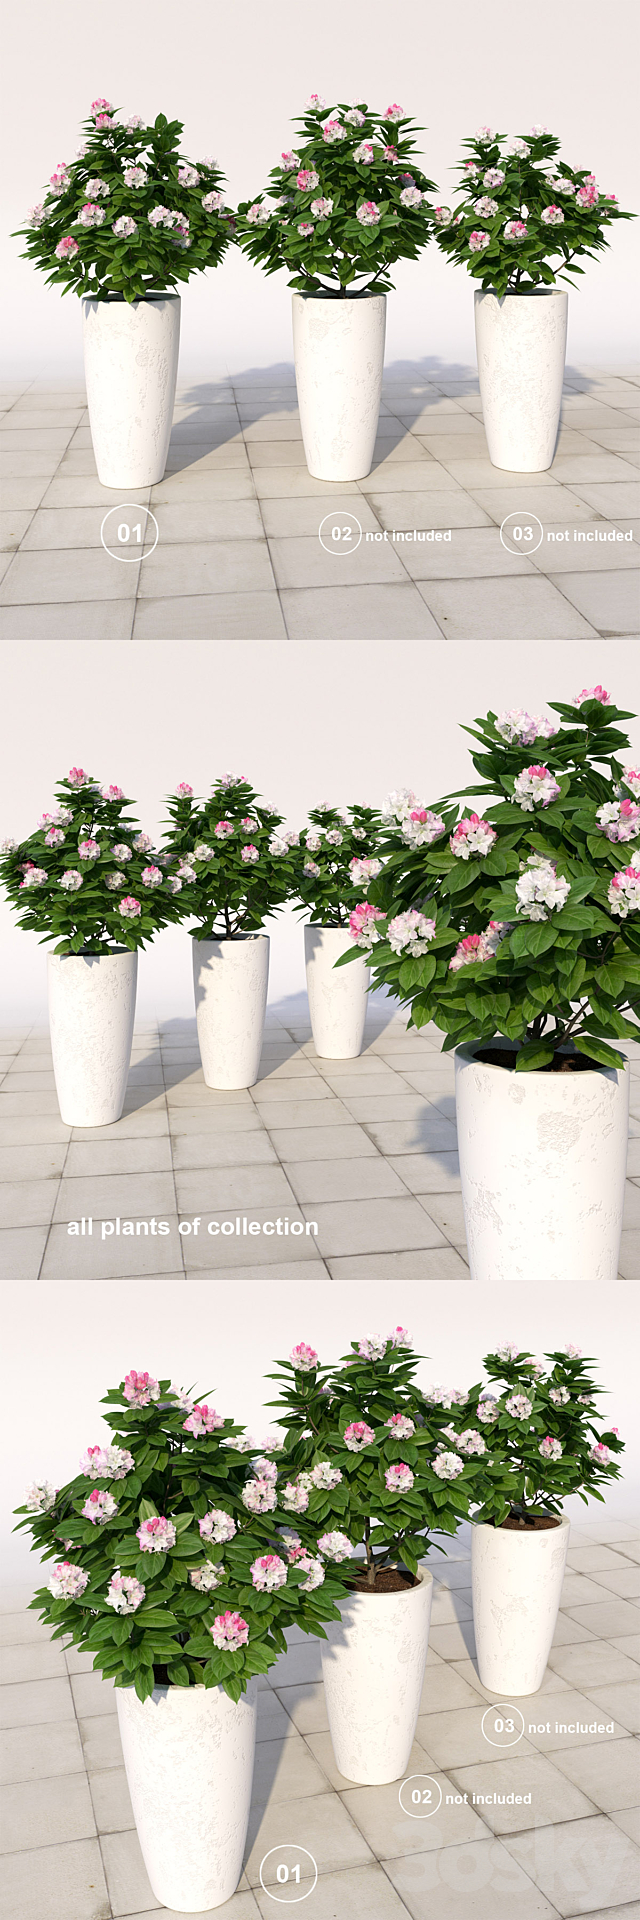 01 Rhododendron blossoming _ Rhododendron 3DSMax File - thumbnail 3